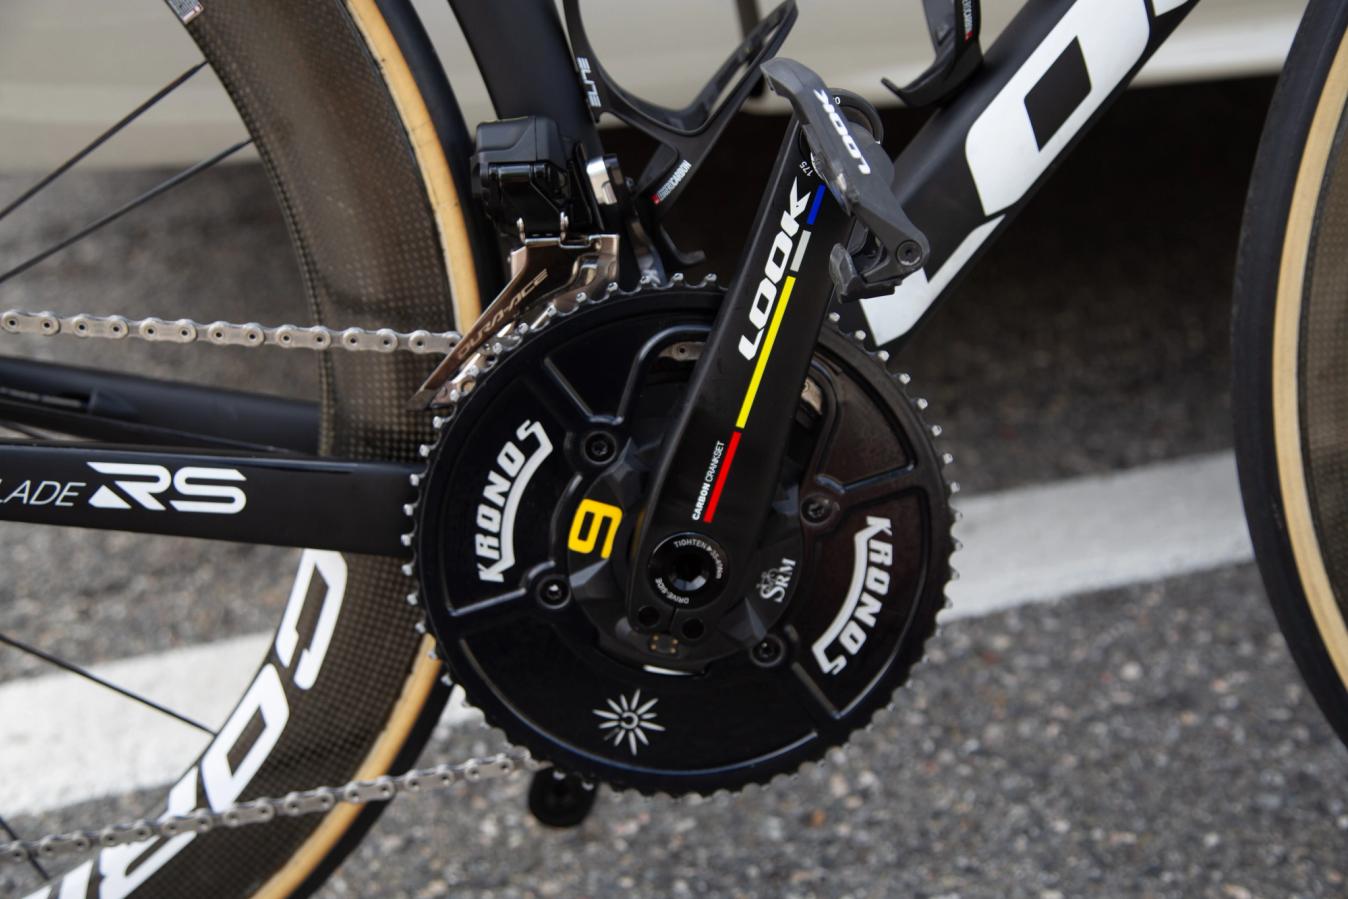 Kronos chainrings are more common on track bikes